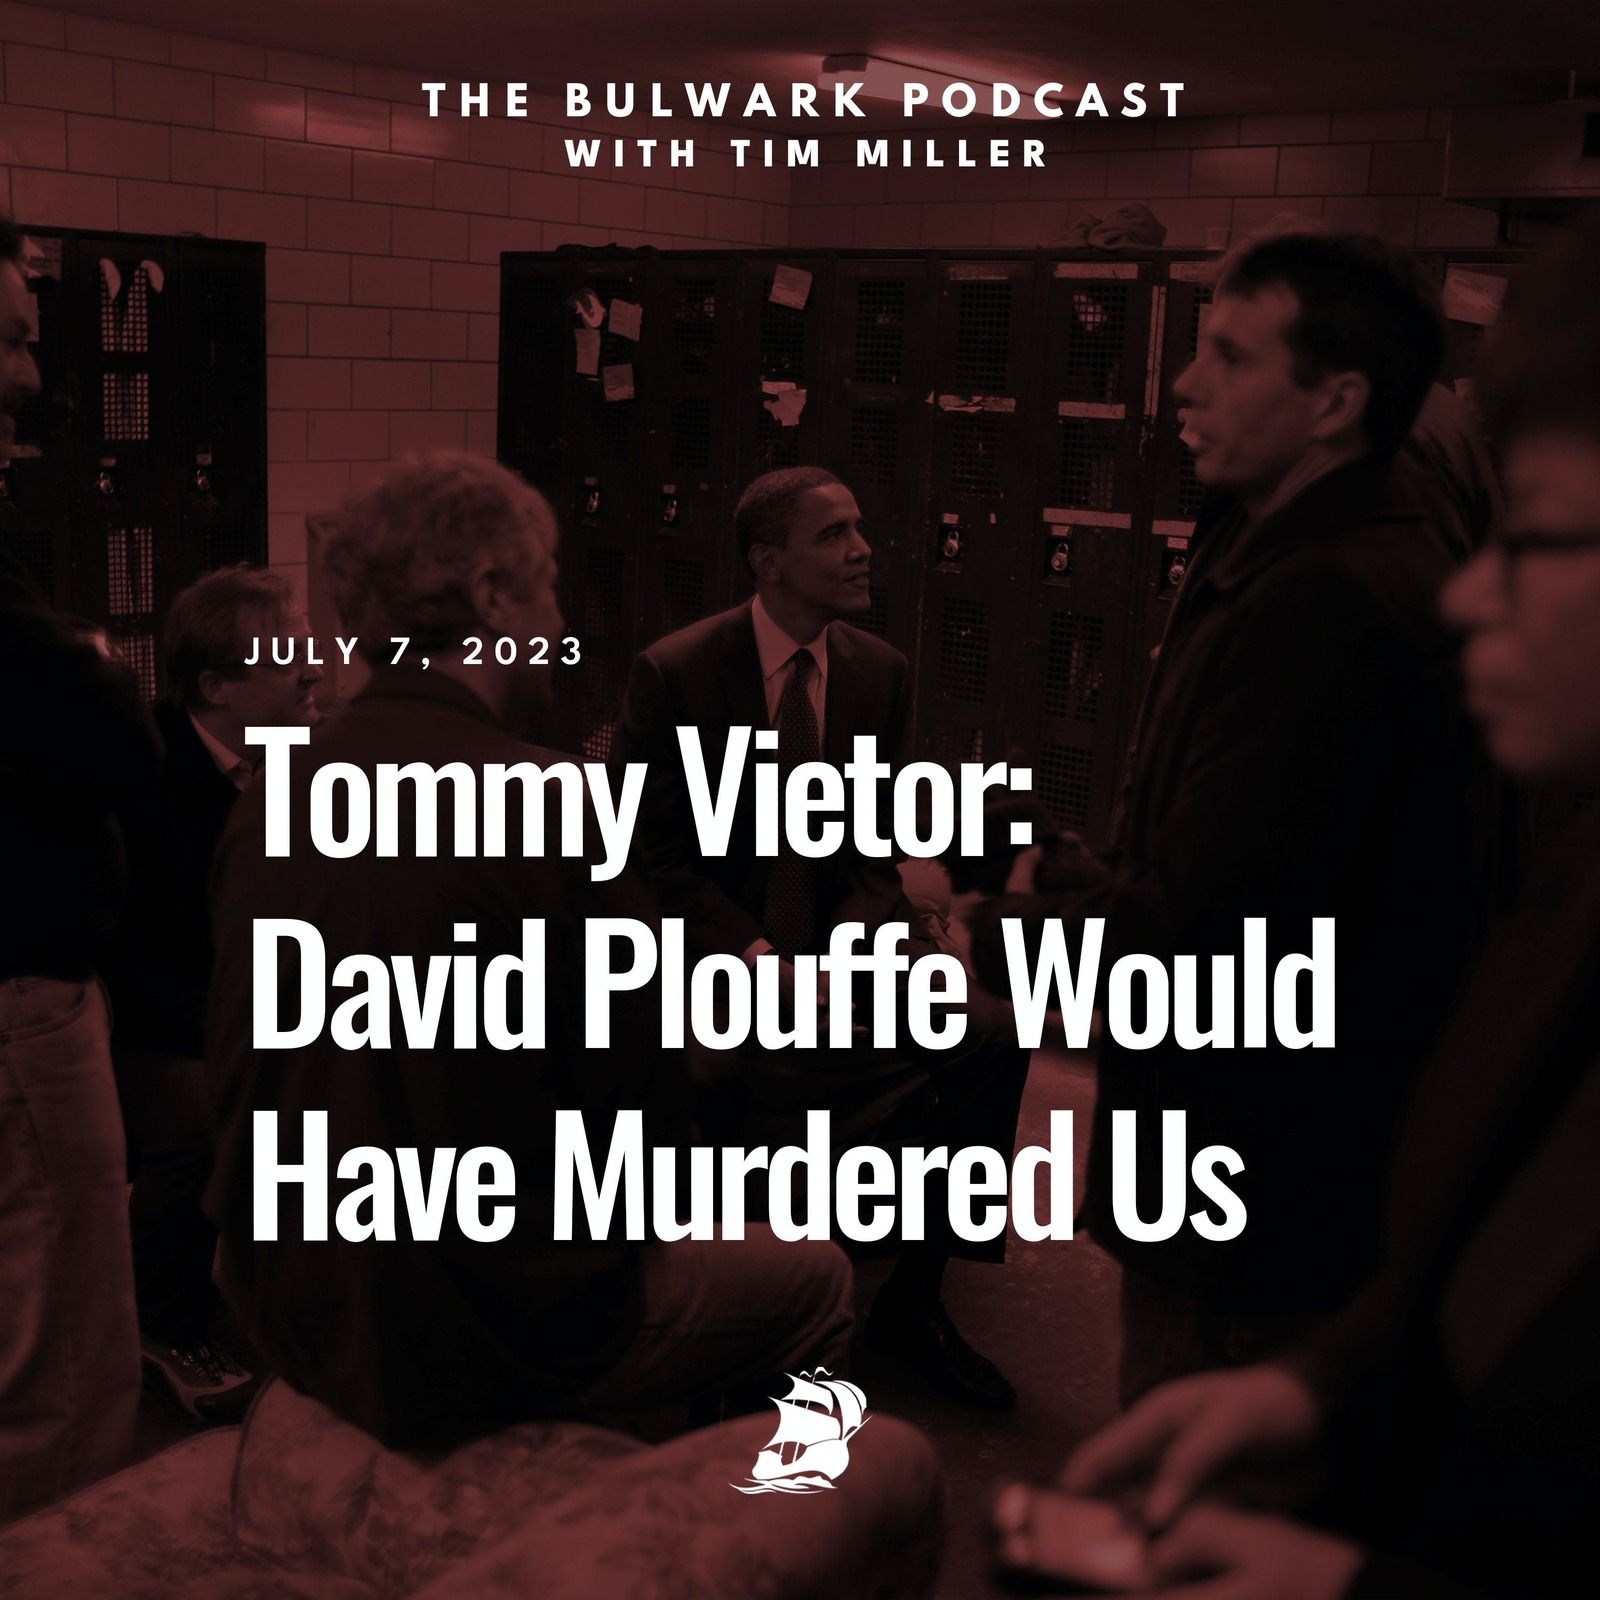 Tommy Vietor: David Plouffe Would Have Murdered Us by The Bulwark Podcast